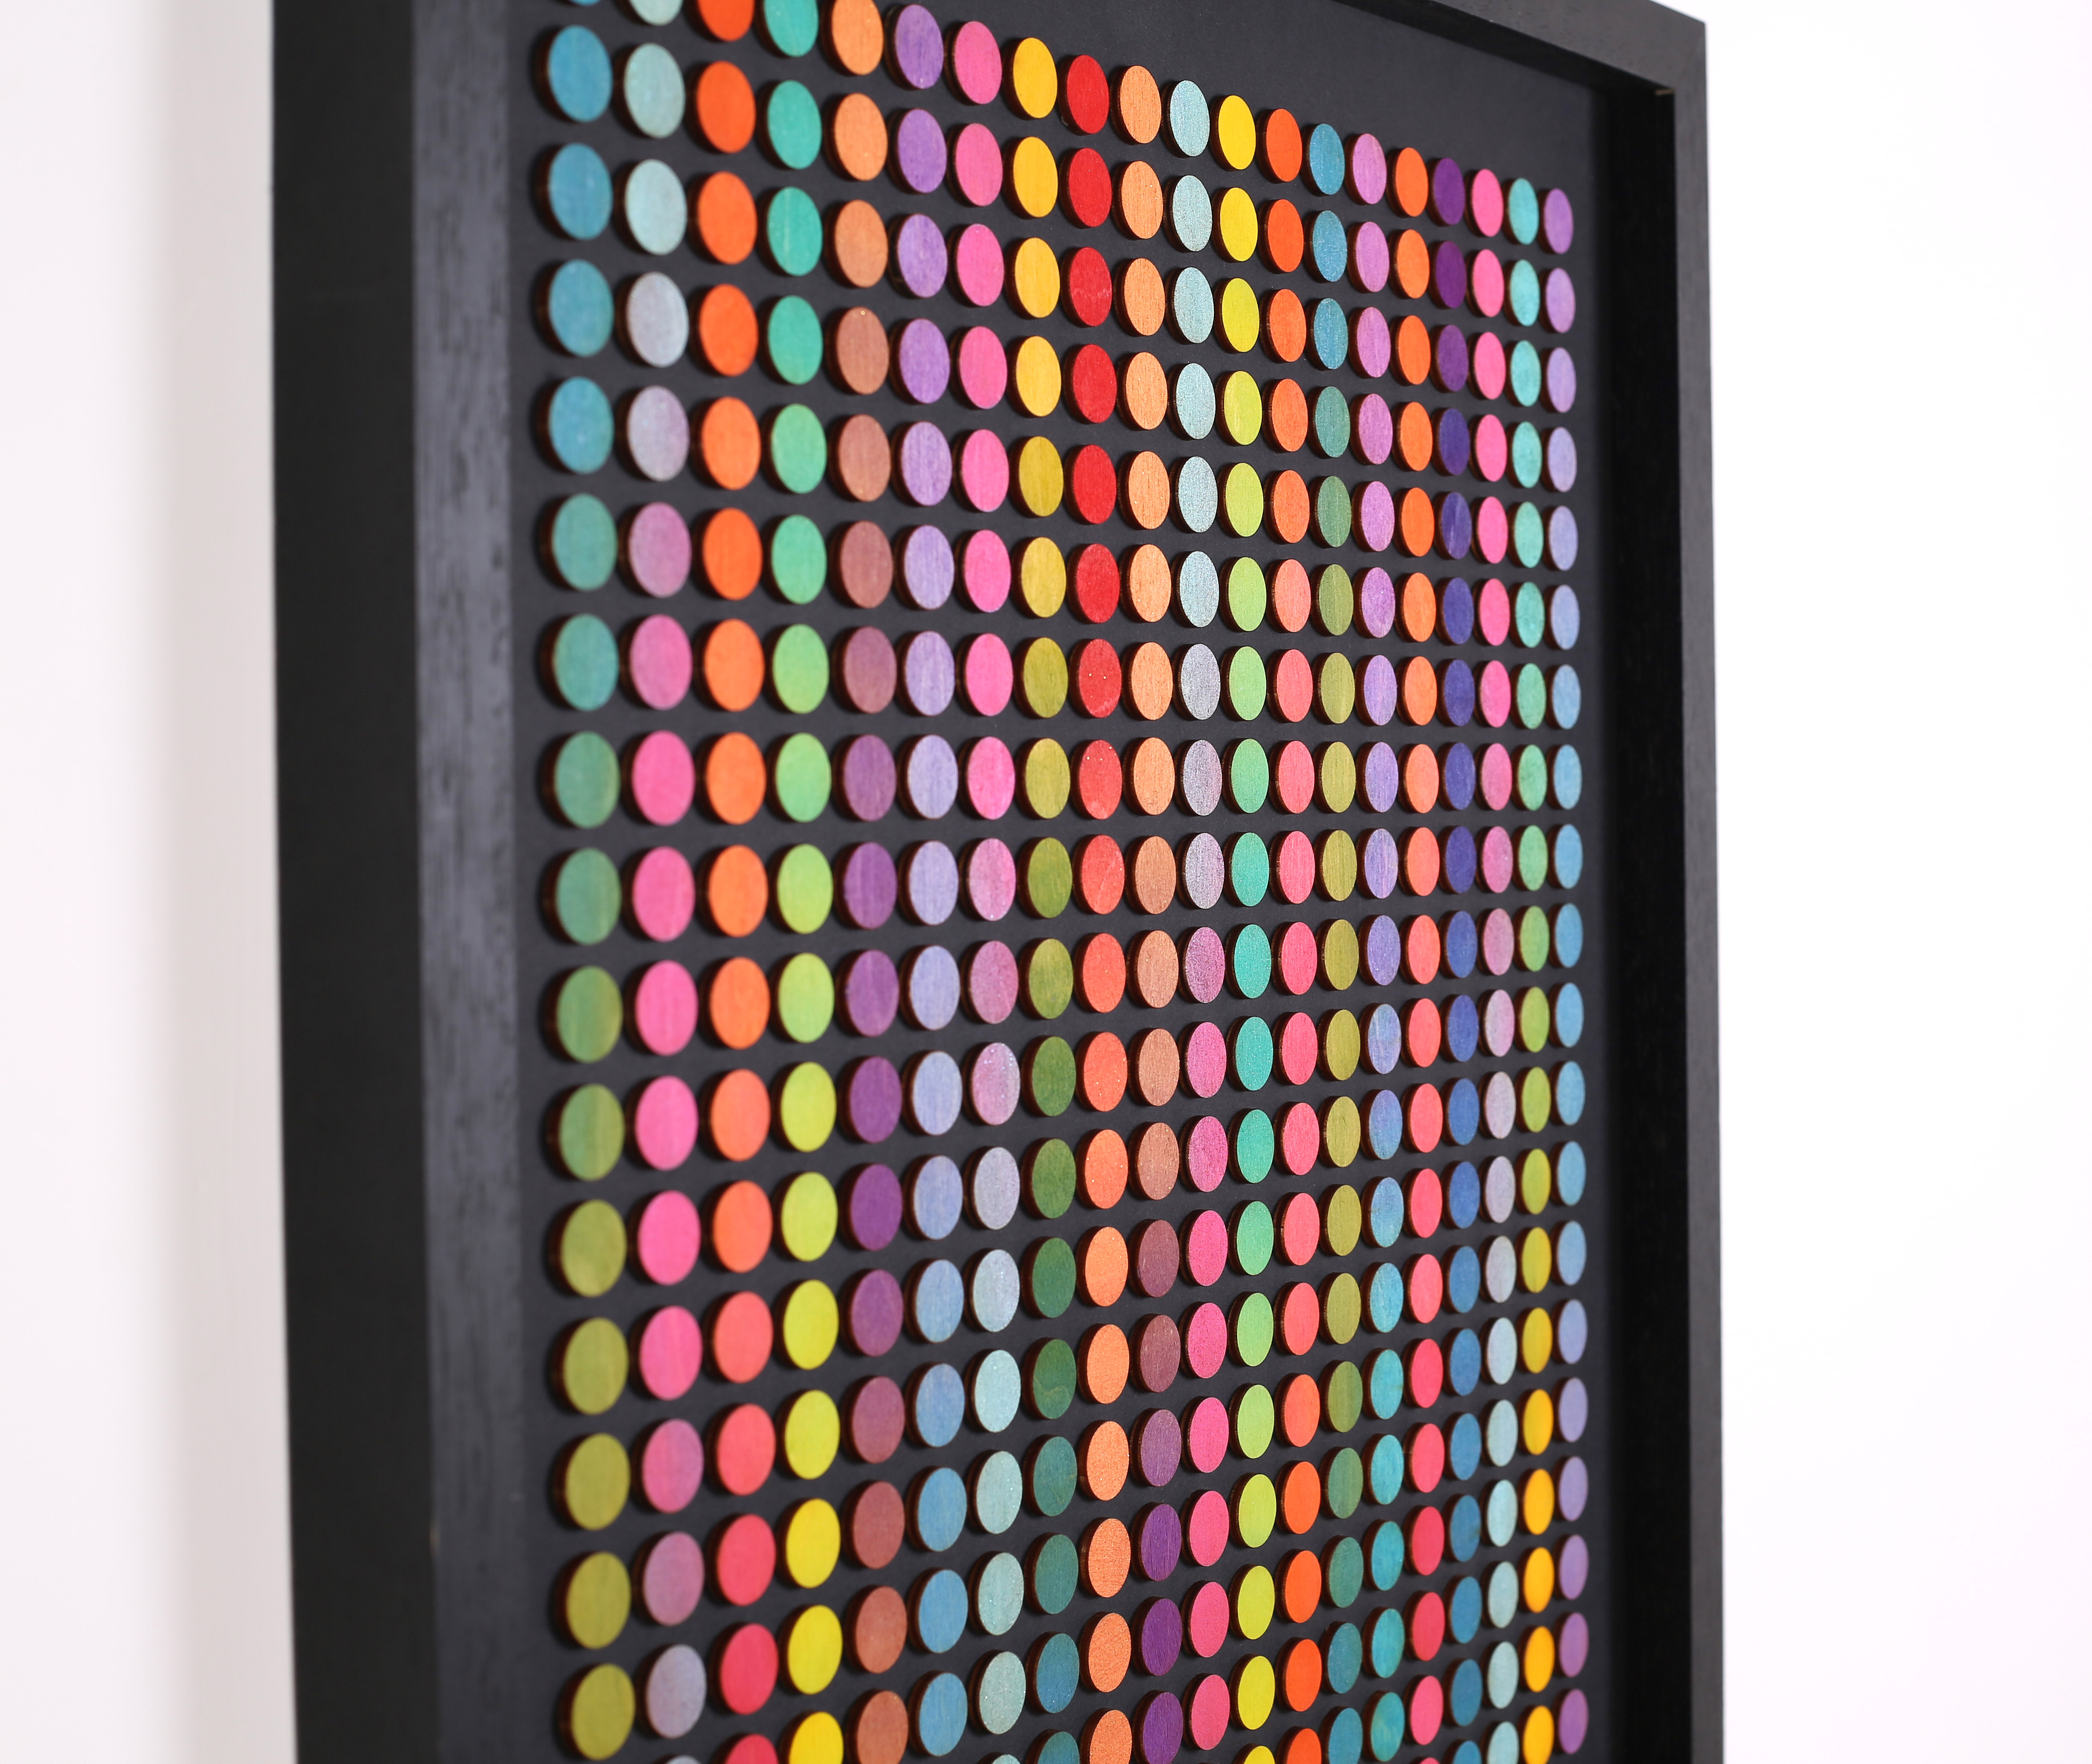 Amelia Coward, Graded Dots, The Auction Collective